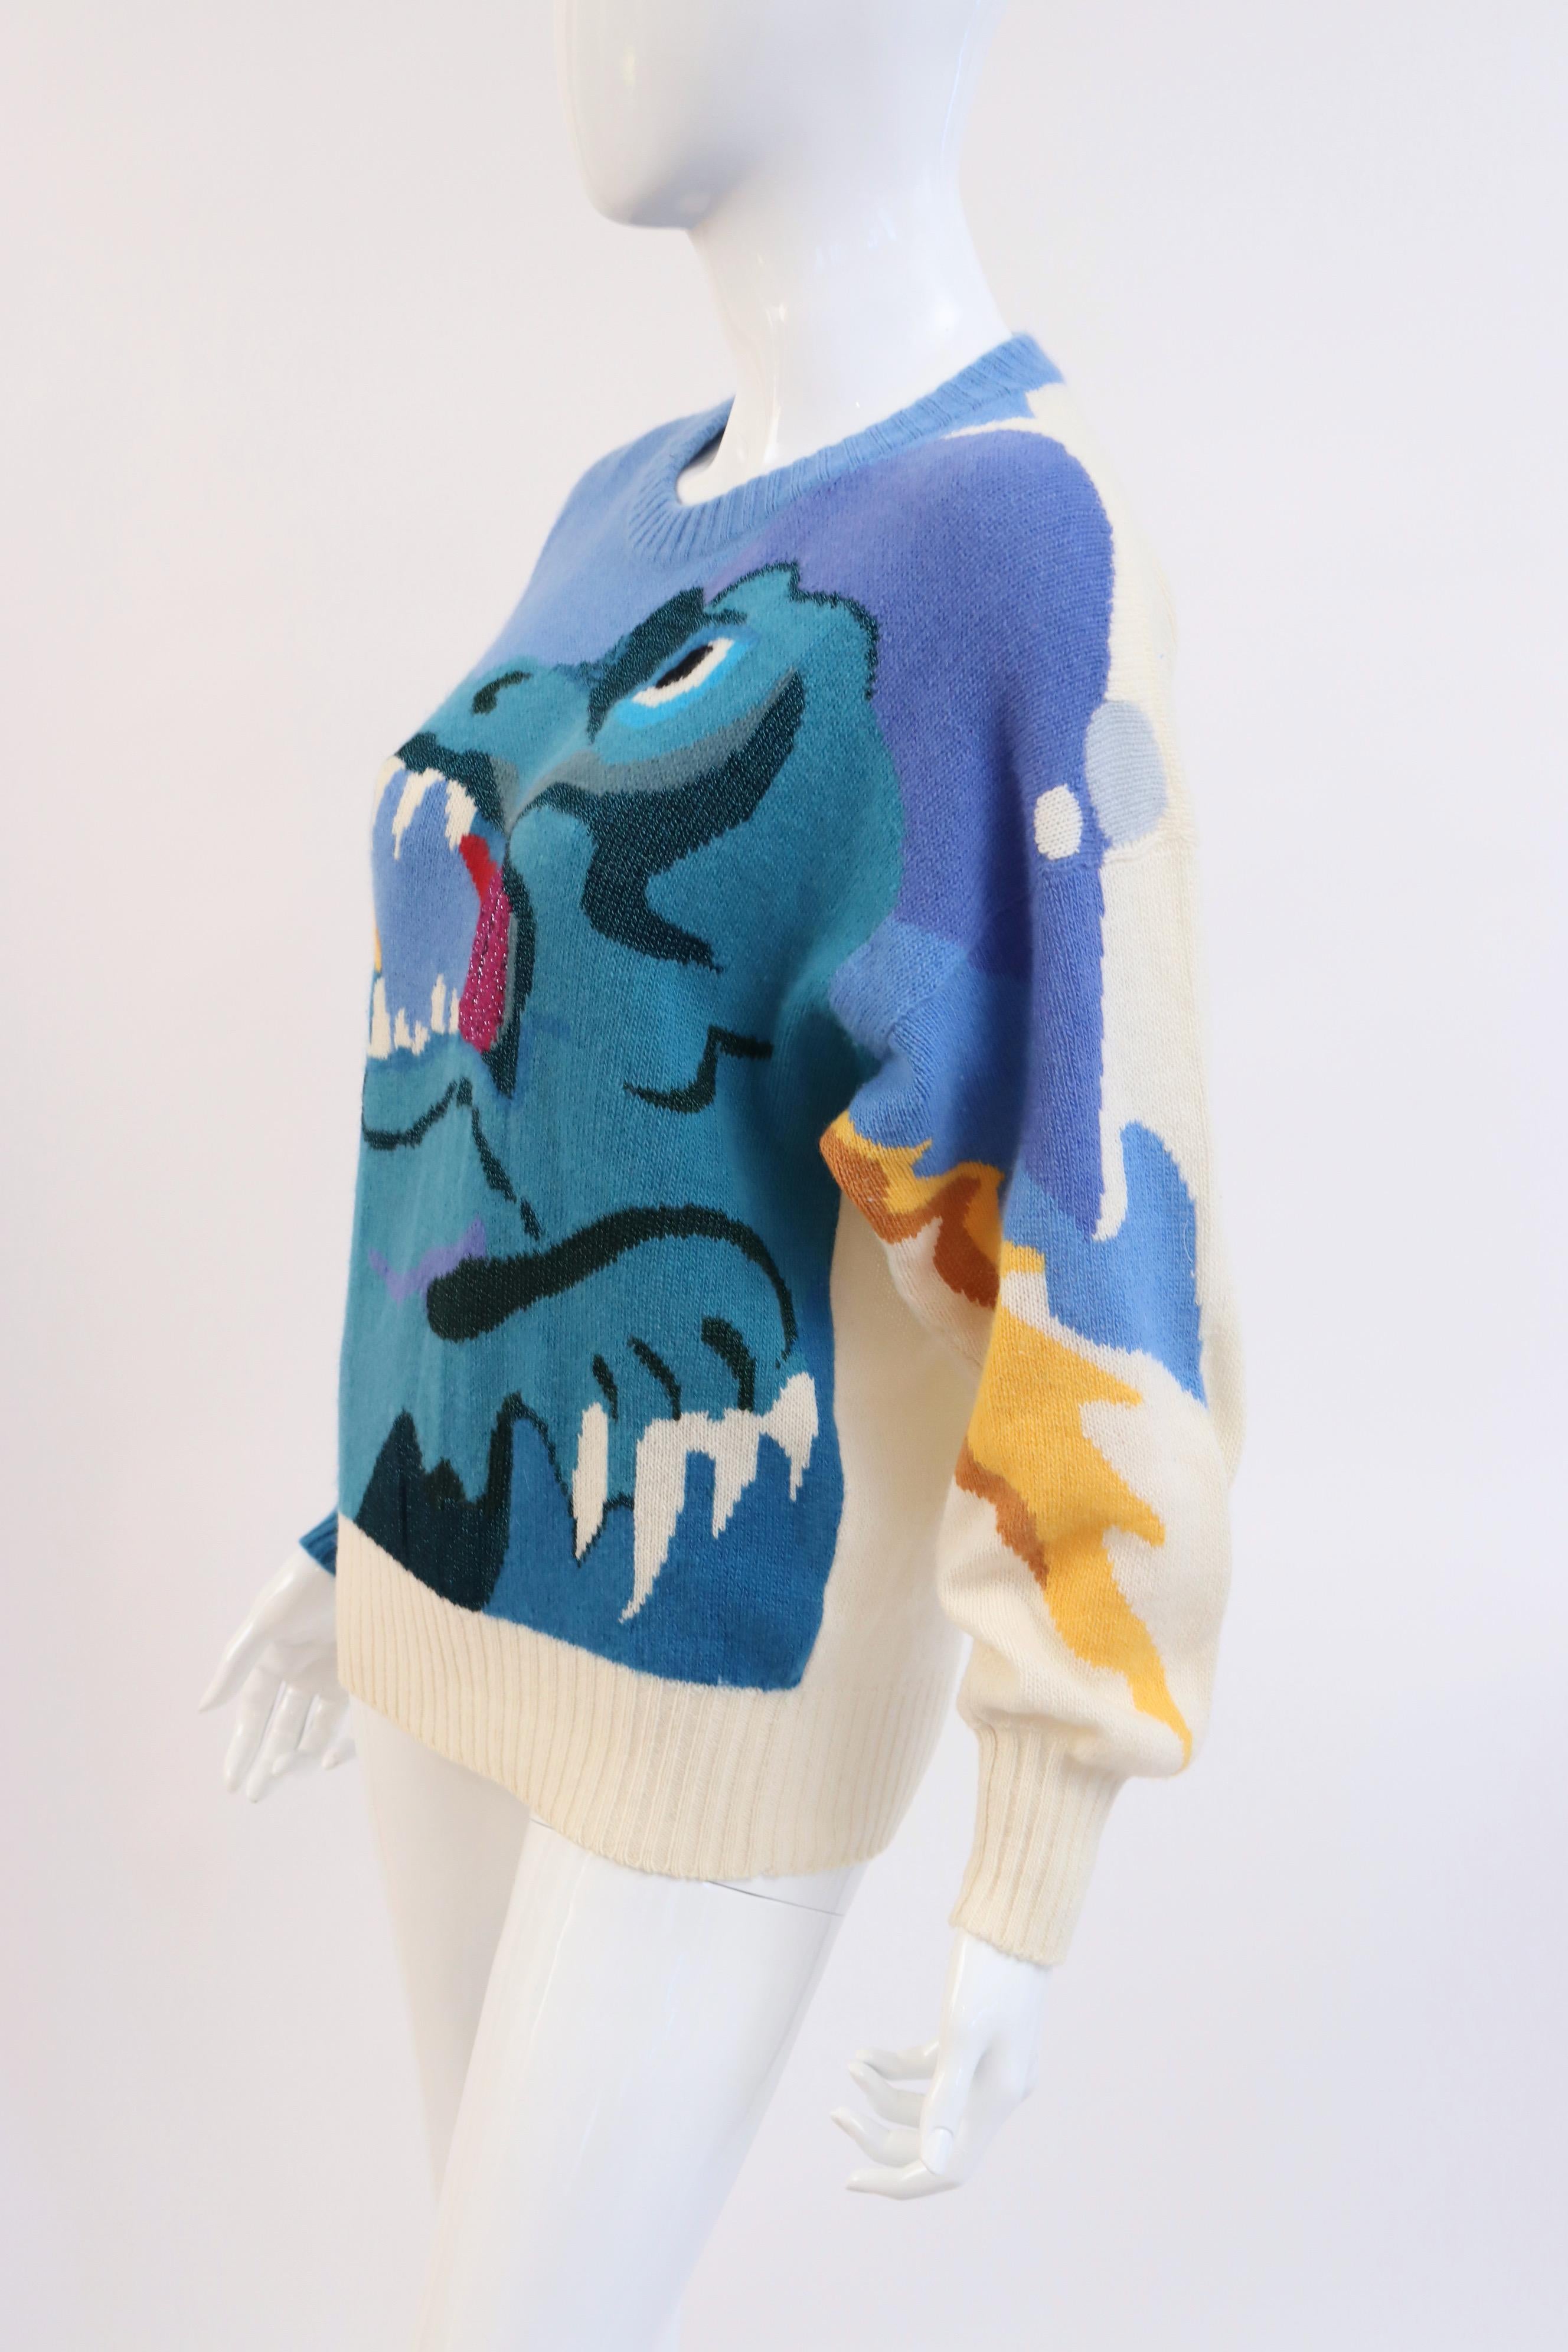 KRIZIA Vintage 80's Dragon Dino Sweater In Excellent Condition For Sale In Georgetown, ME